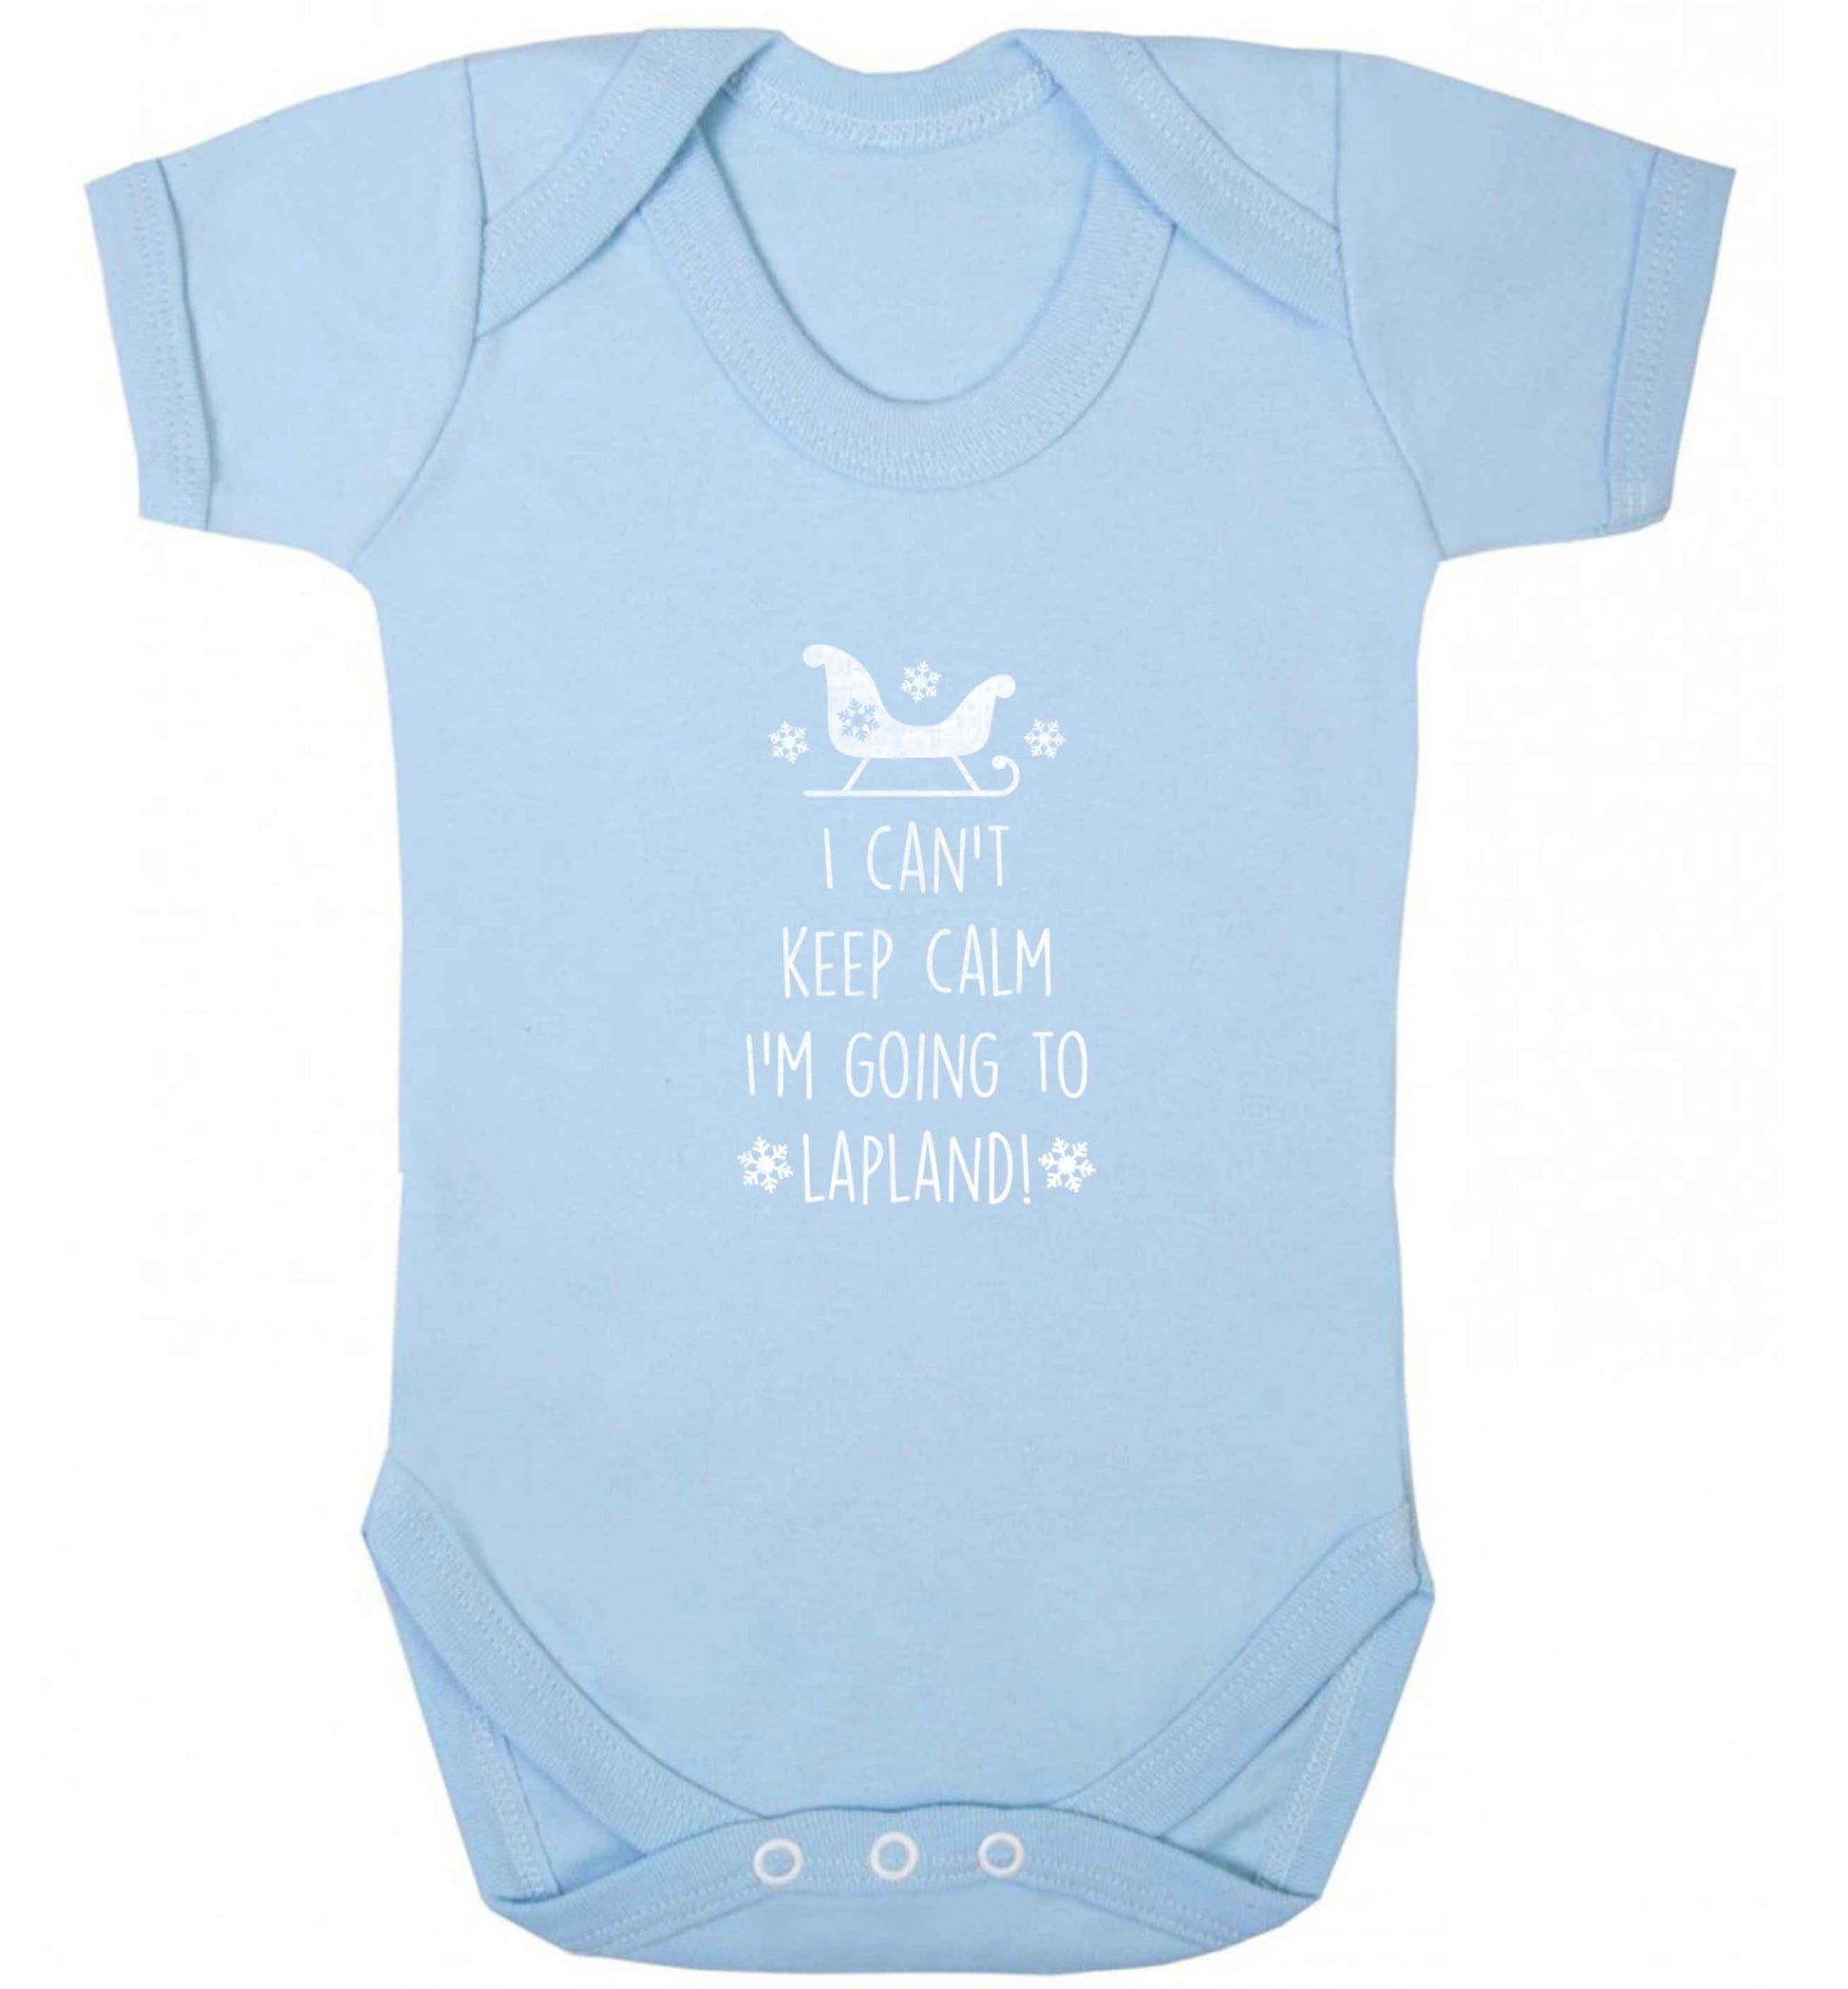 I can't keep calm I'm going to Lapland baby vest pale blue 18-24 months